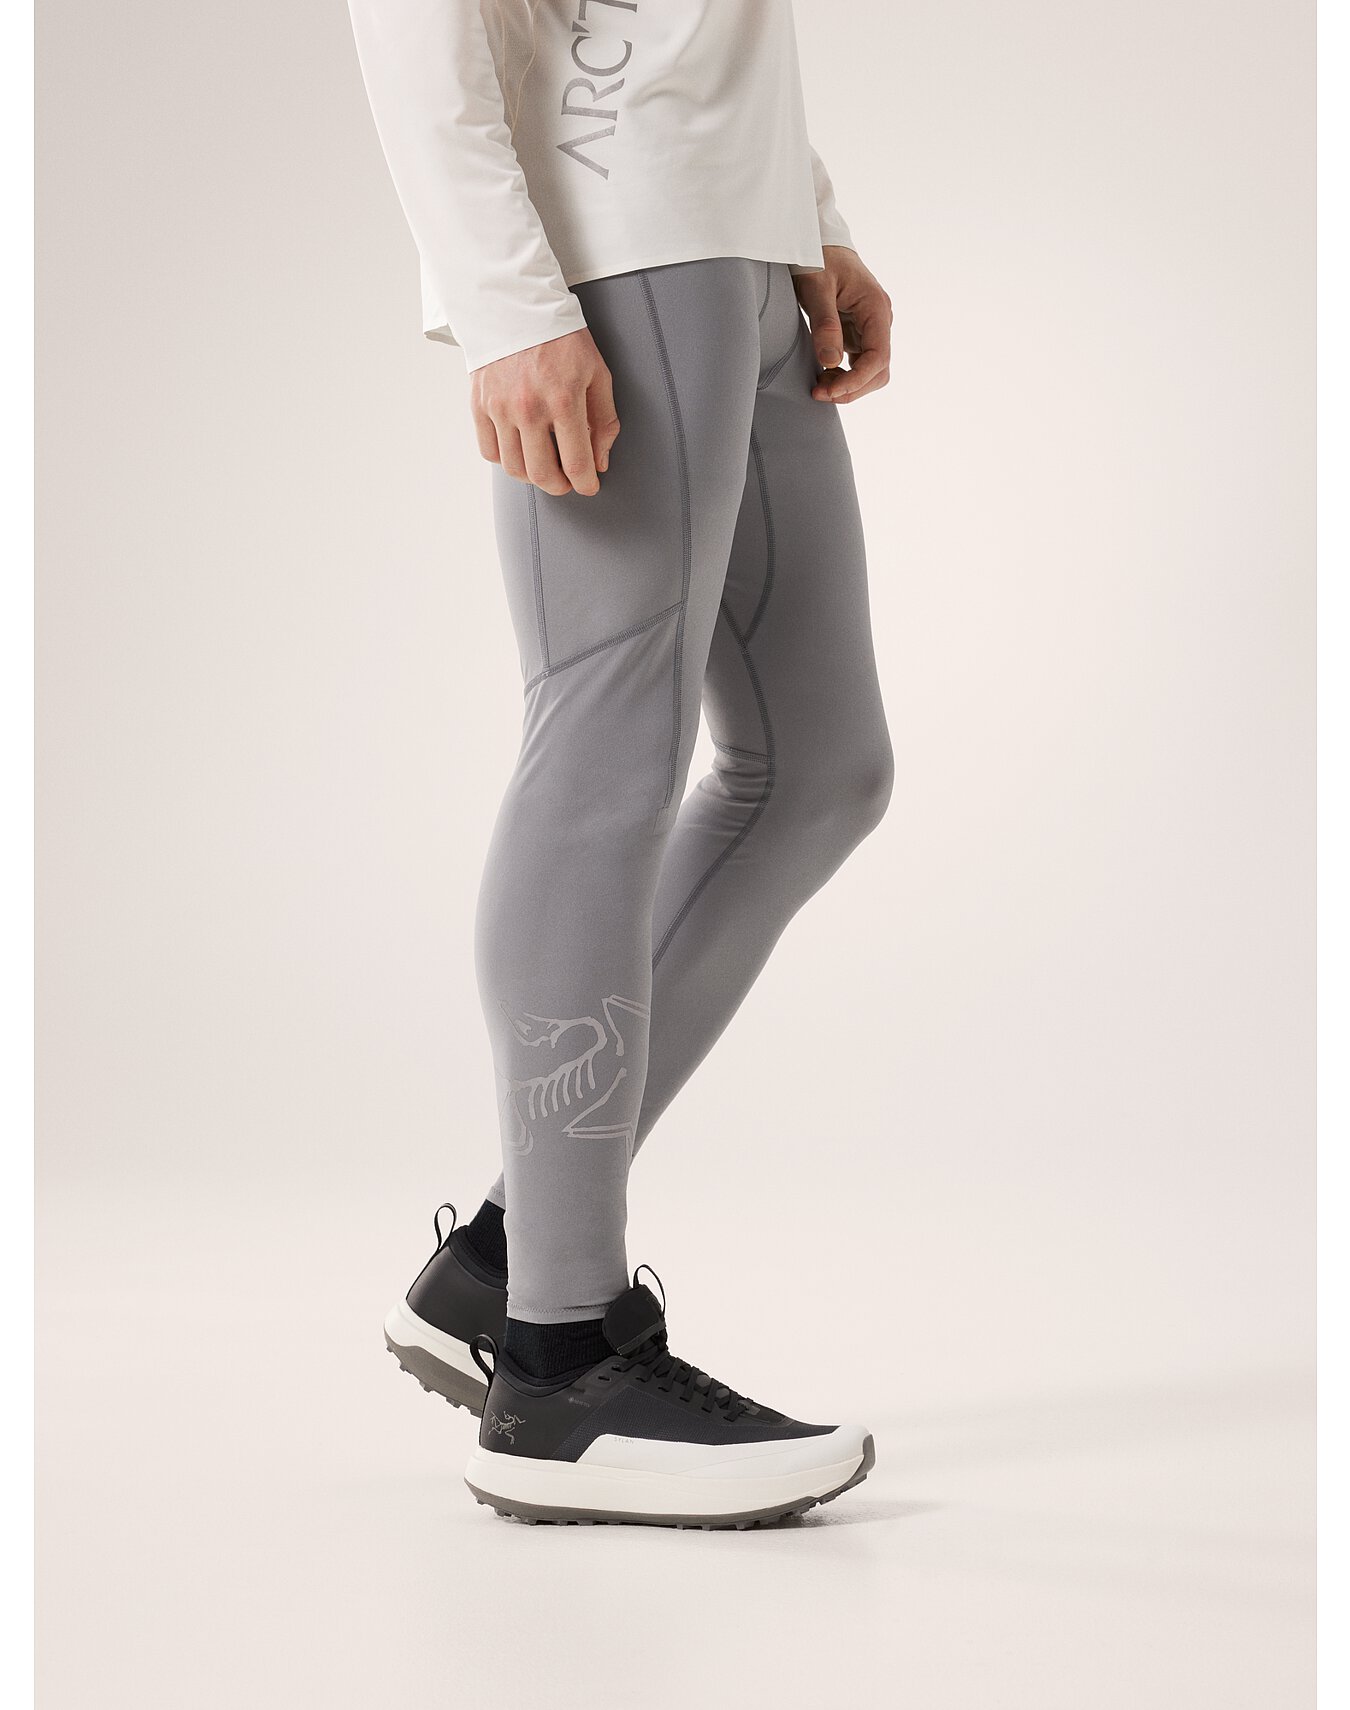 Best Men's Compression Leggings For Running Warehouse | International  Society of Precision Agriculture